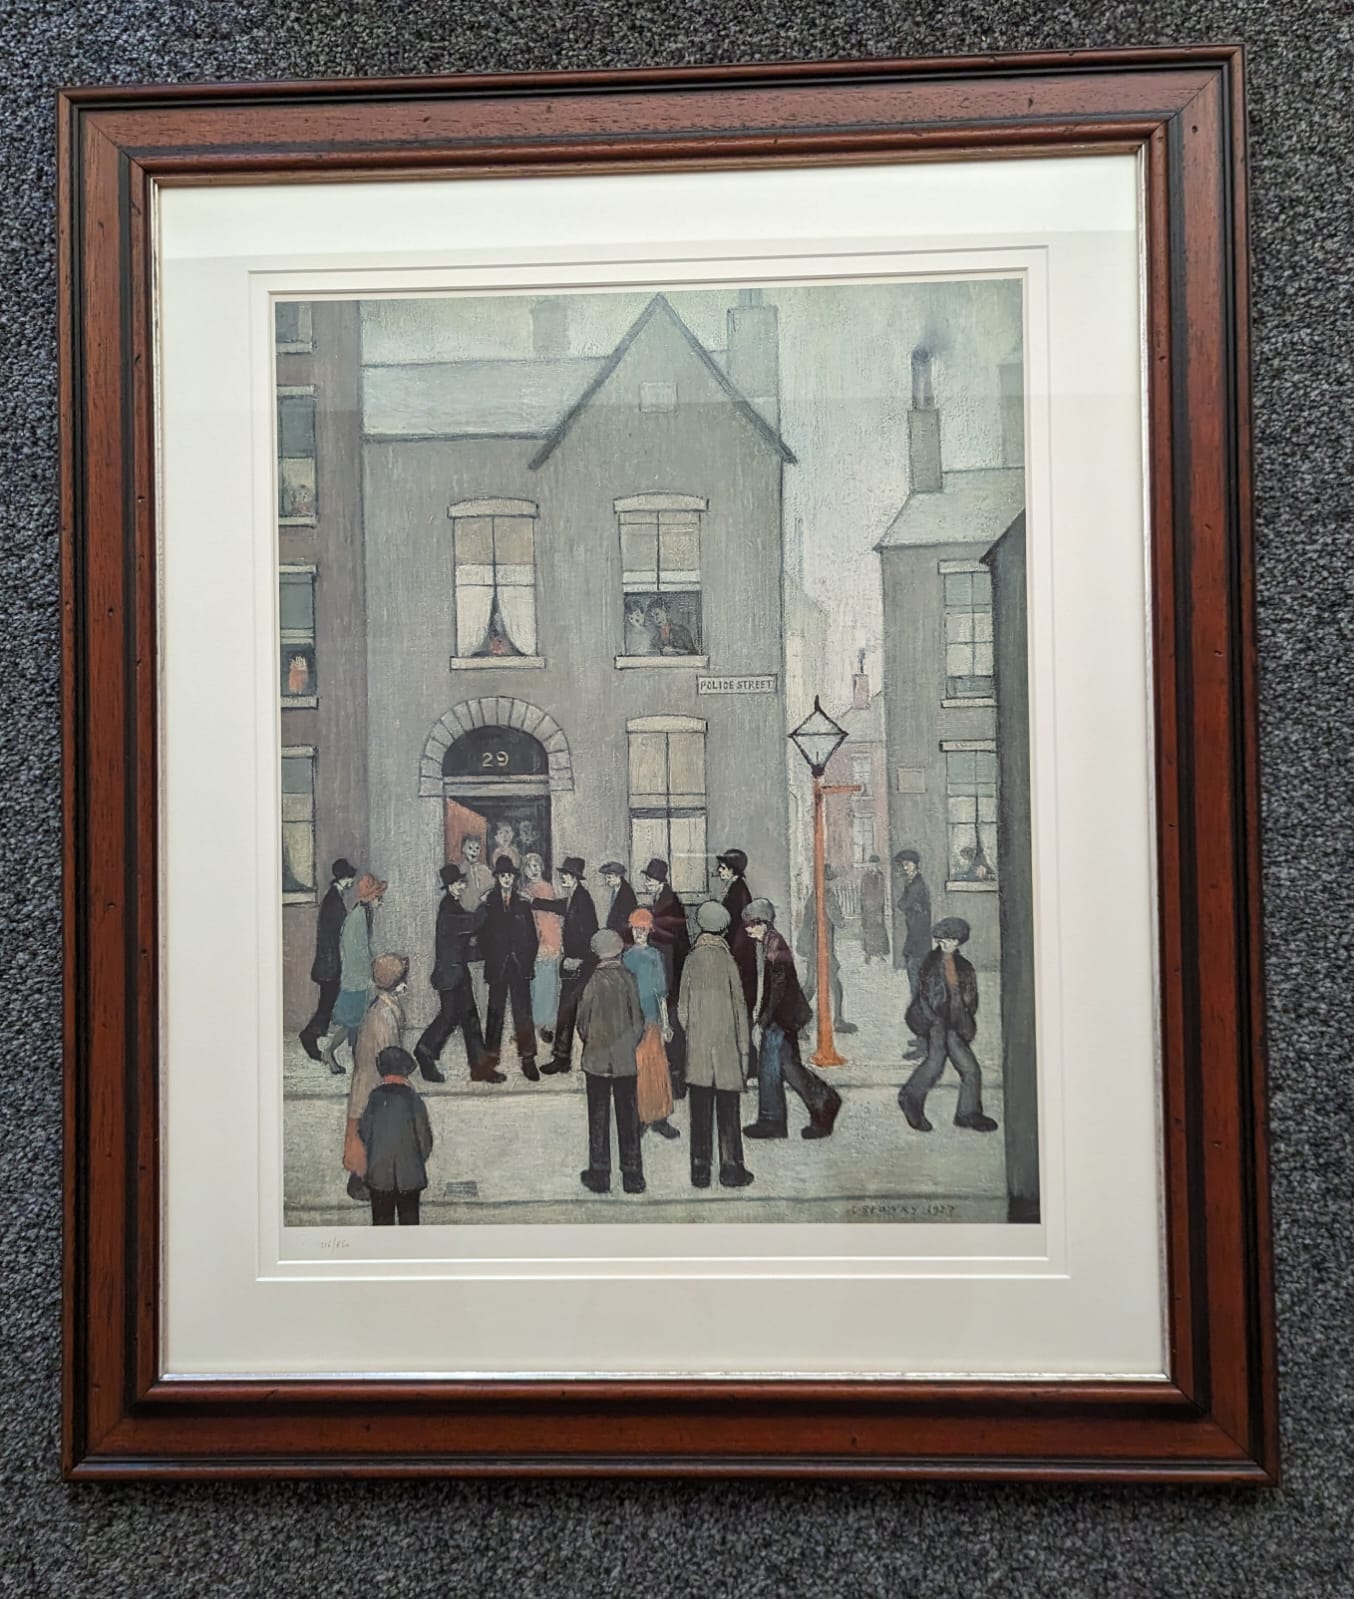 The Arrest by LS Lowry